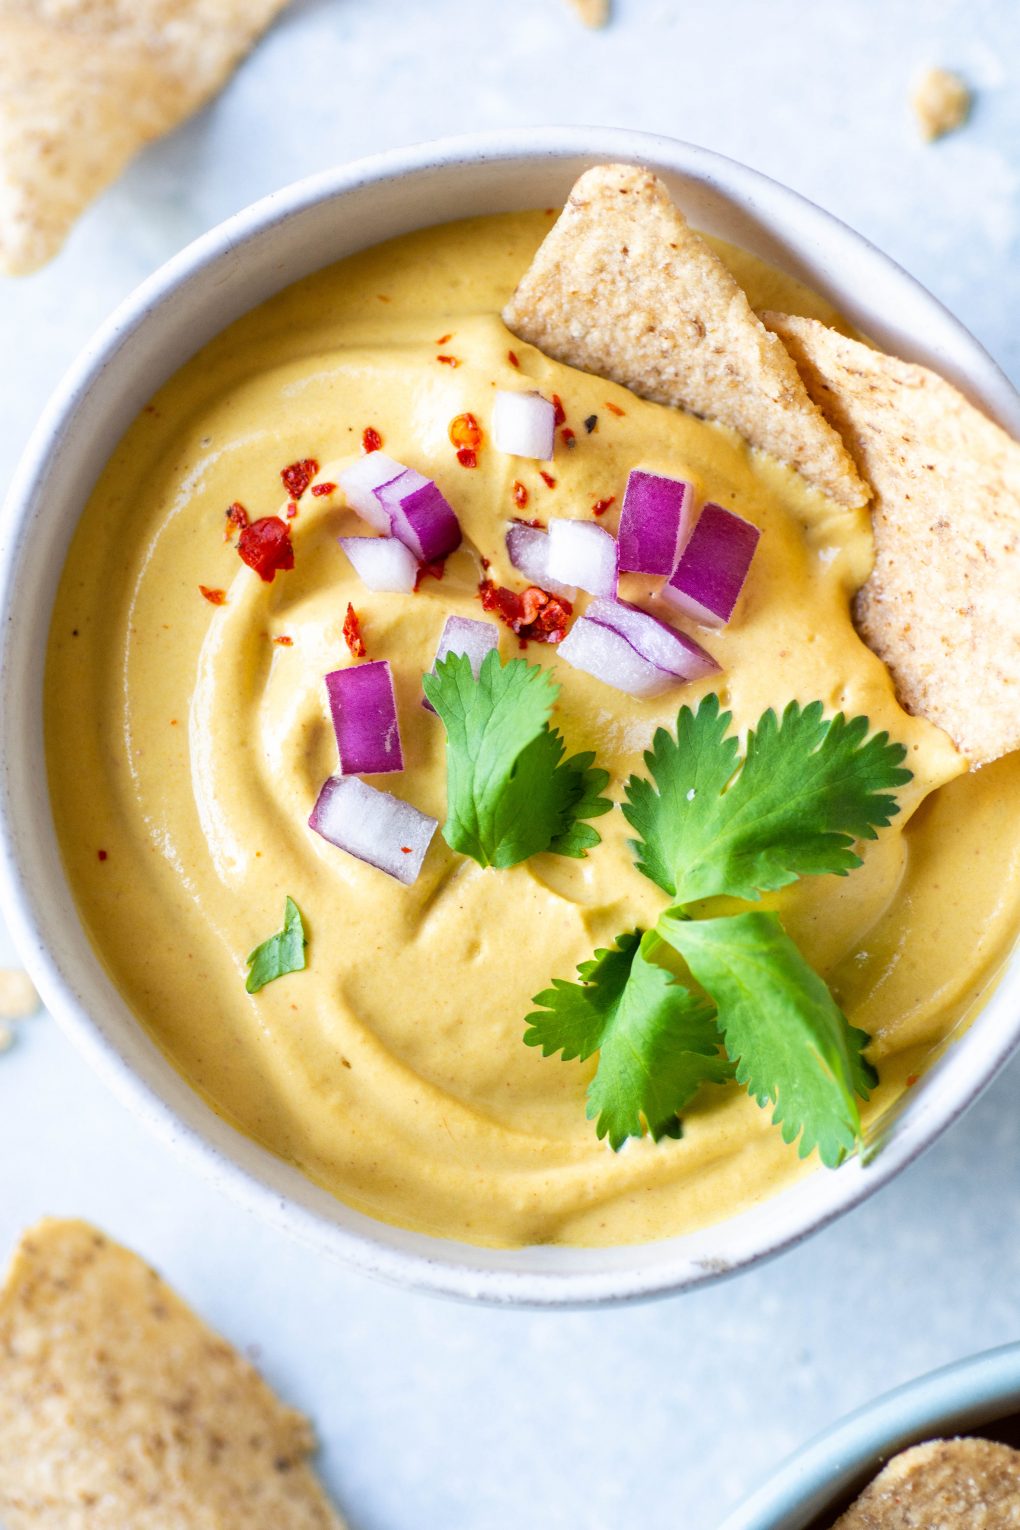 Close up shot of a small white bowl of pumpkin cashew queso on a light background. Garnished with chopped red onion, cilantro, and red chili flakes. Two chips are half dipped into the queso and it's surrounded by lime wedges and scattered chips.